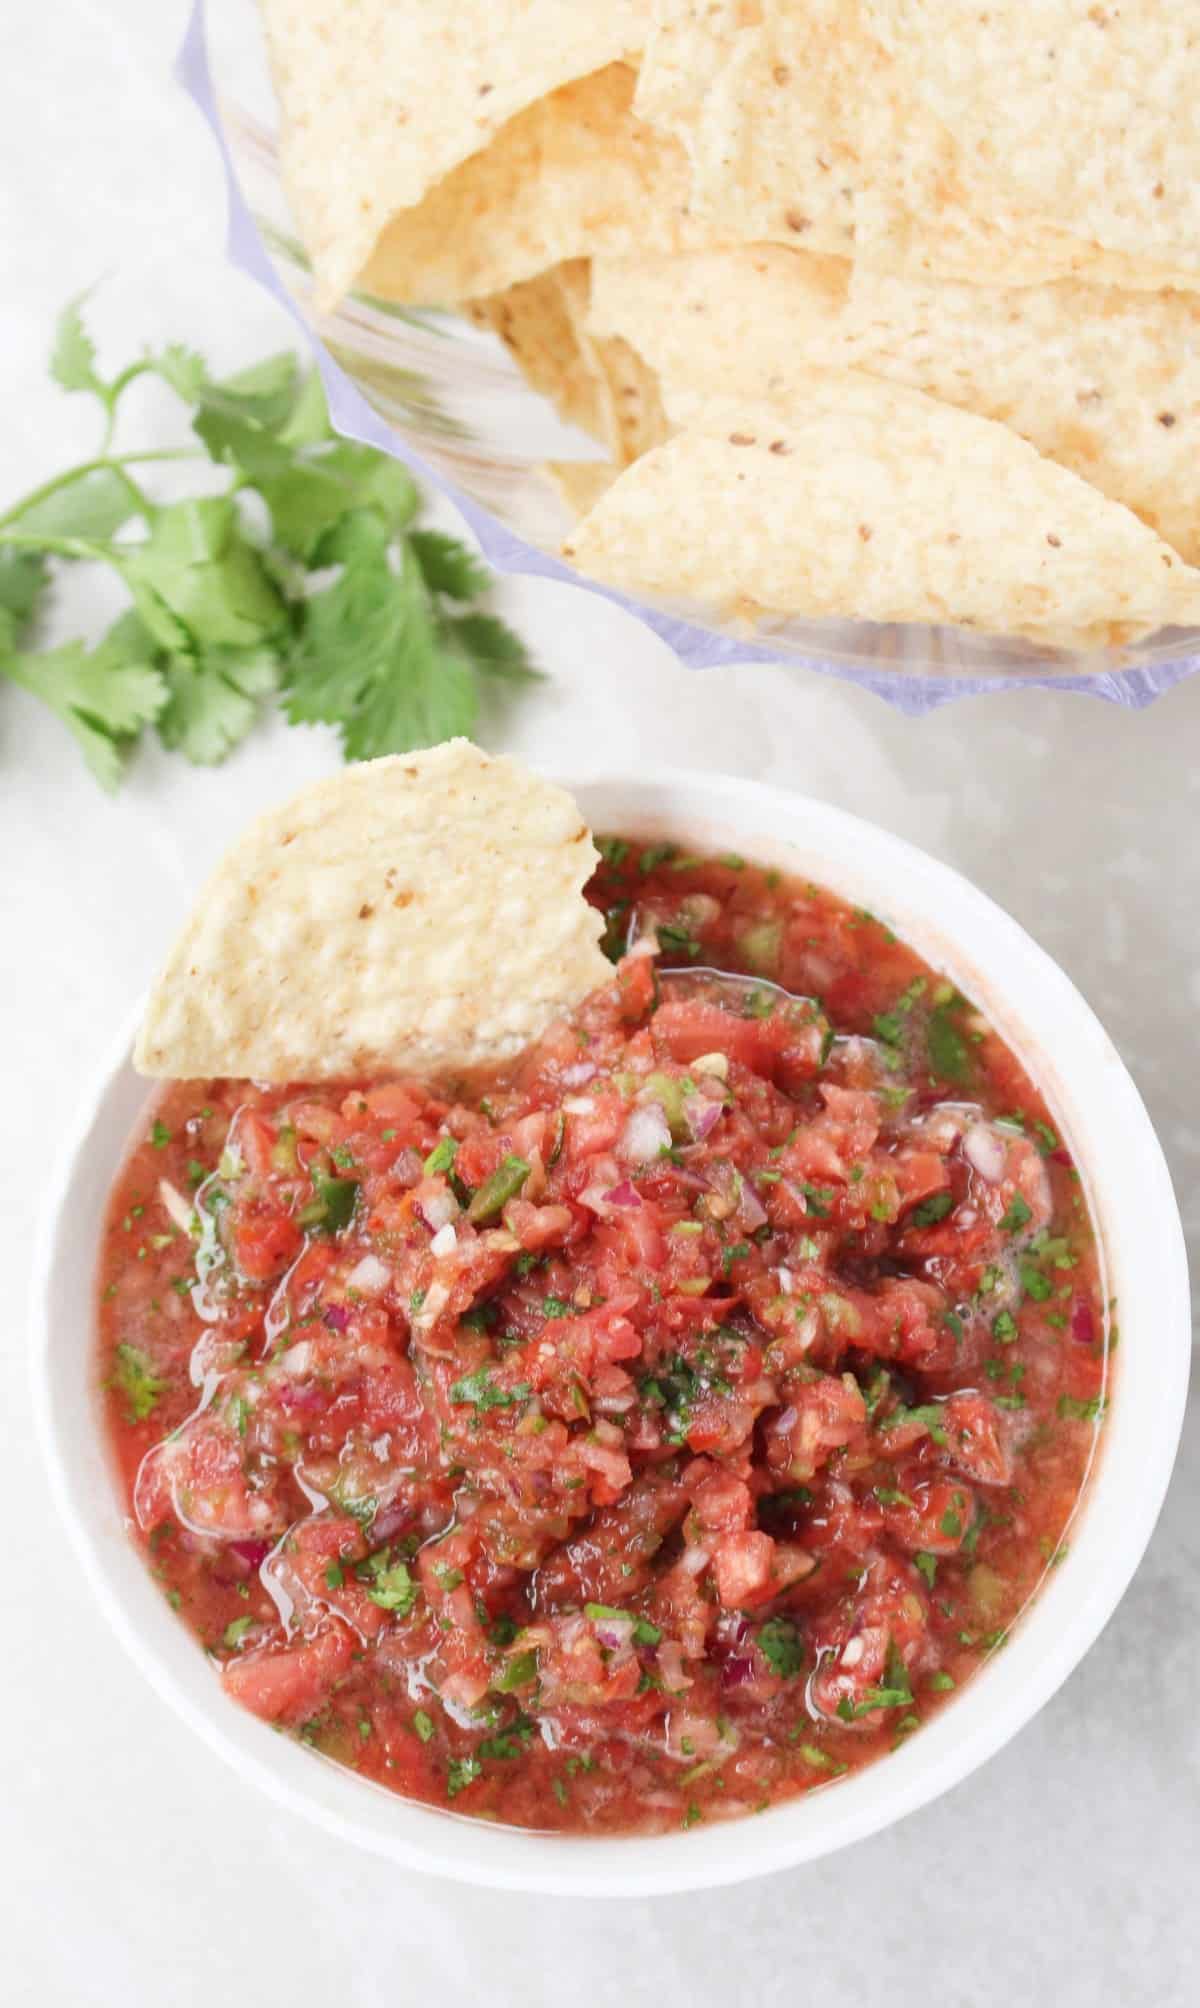 corn chips dipped into tomato salsa in a white bowl